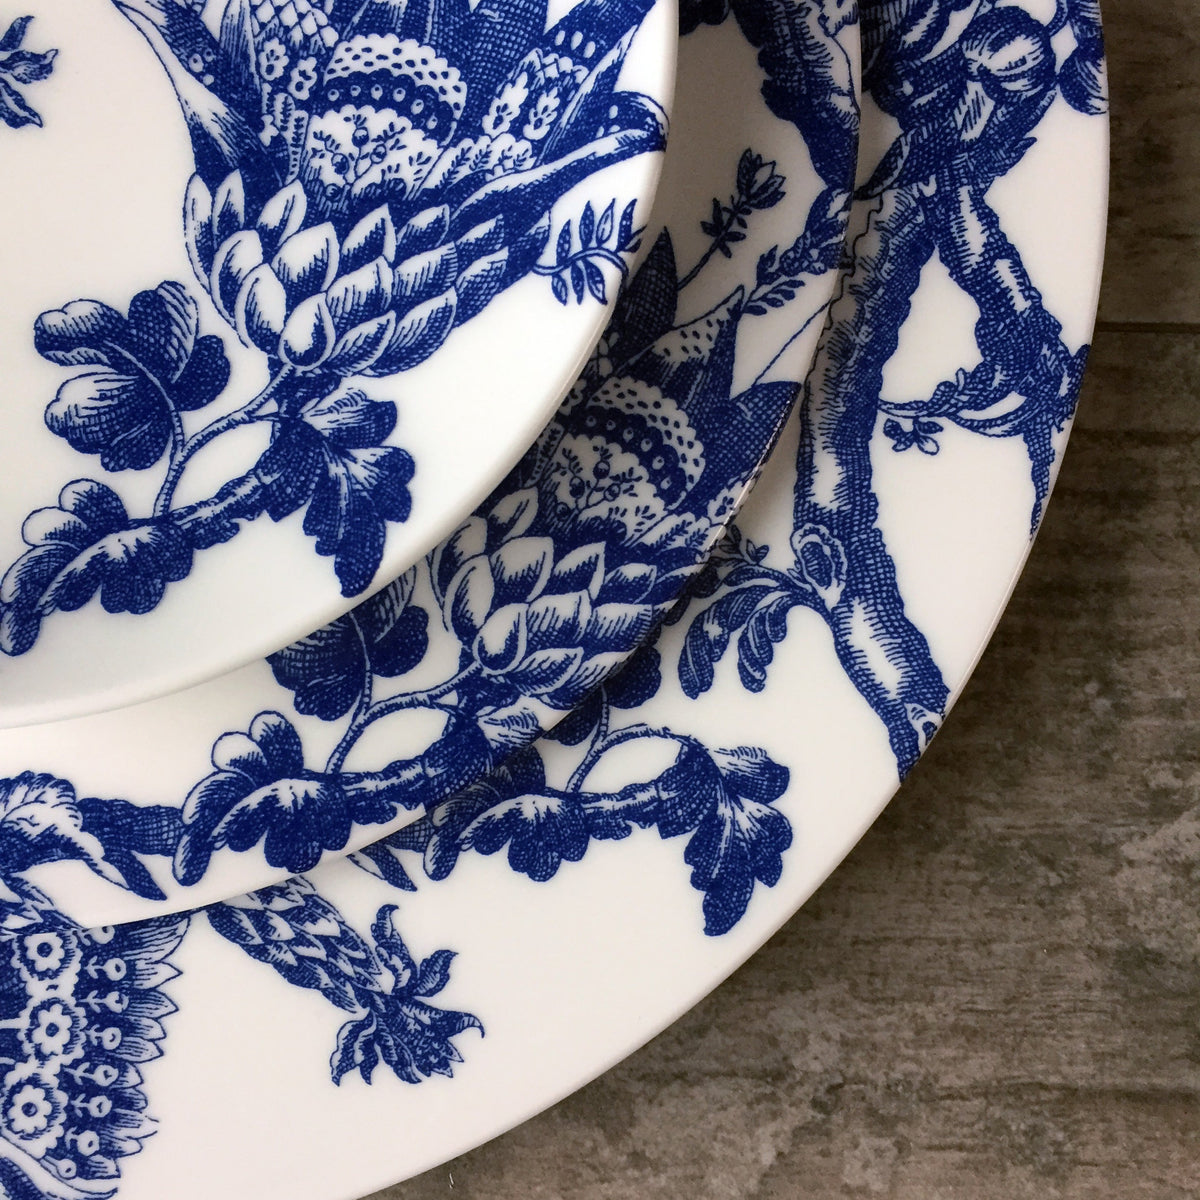 A close up photo of blue and white porcelain Arcadia Dinnerware from Caskata shows the intricate pattern taken from the Williamsburg Collection archives.